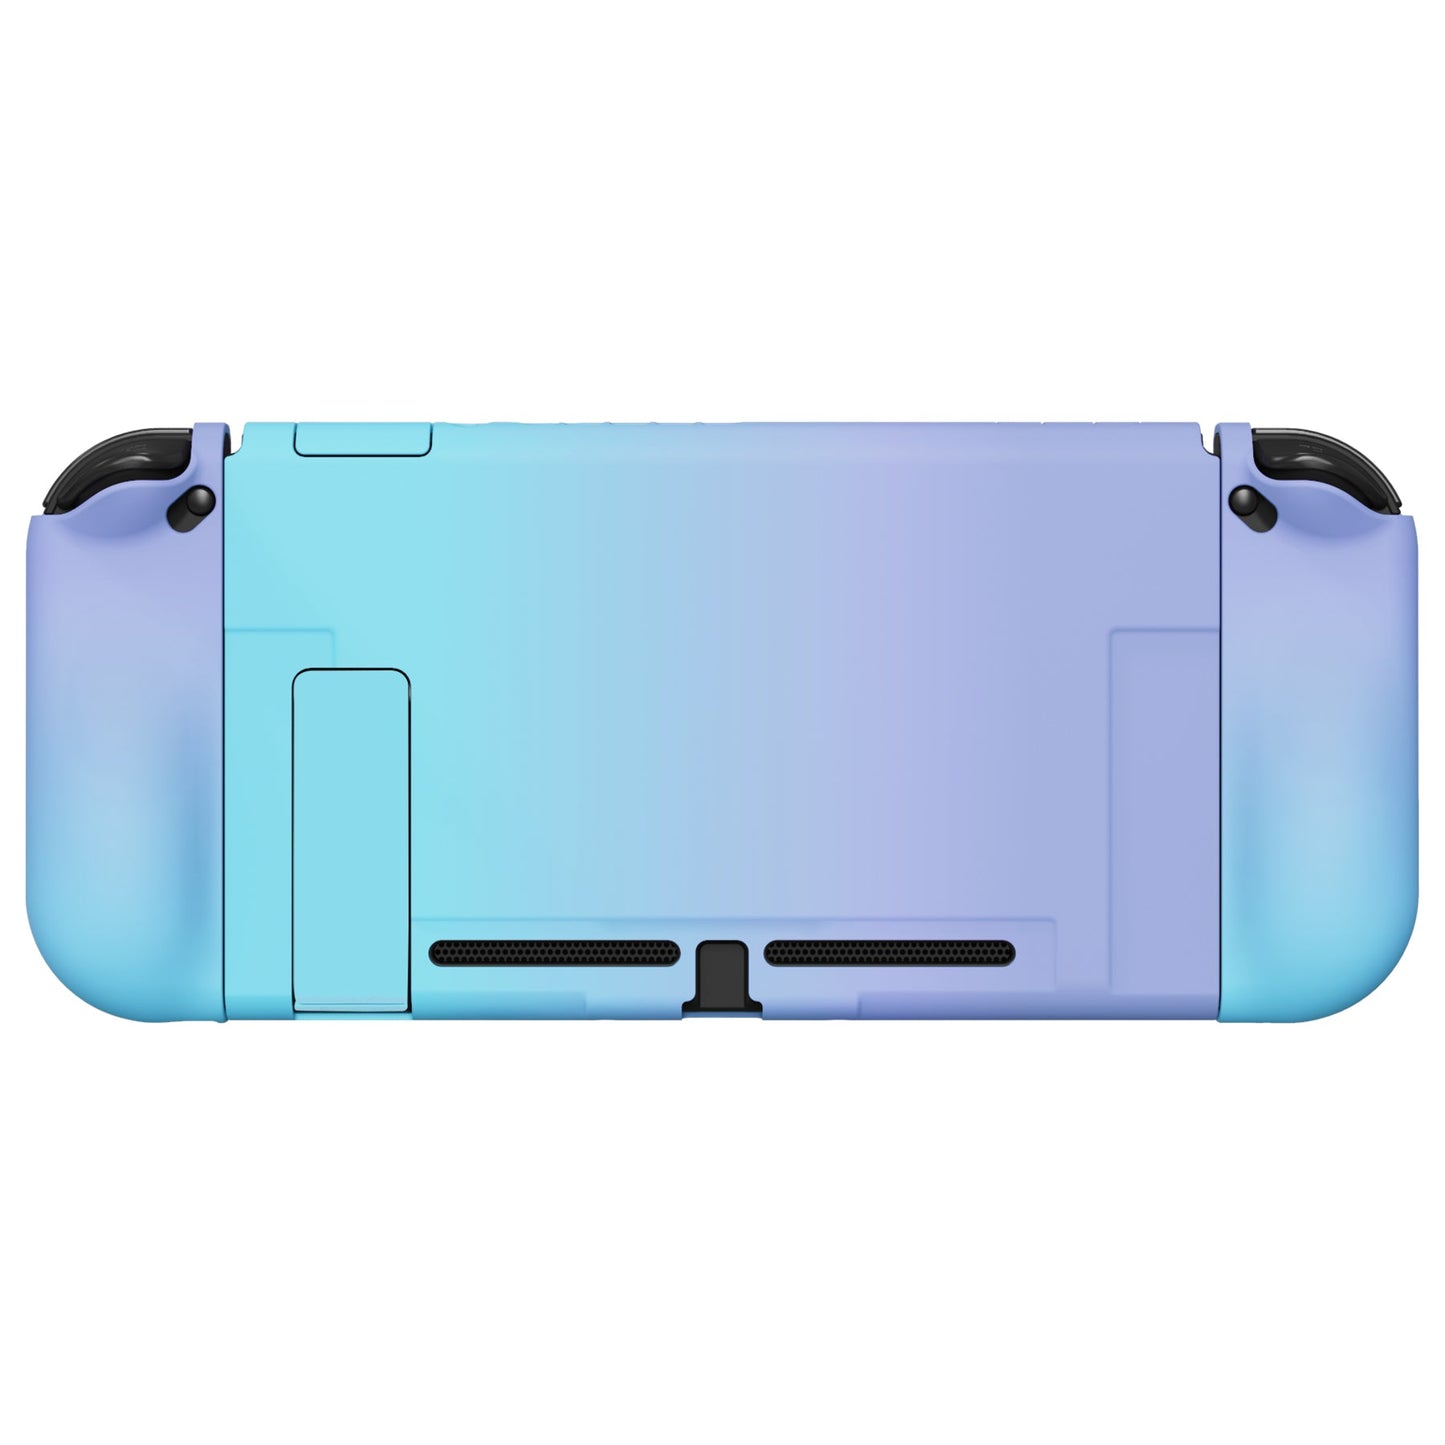 PlayVital UPGRADED Dockable Case Grip Cover for NS Switch, Ergonomic Protective Case for NS Switch, Separable Protector Hard Shell for Joycon - Gradient Violet Blue - ANSP3004 PlayVital